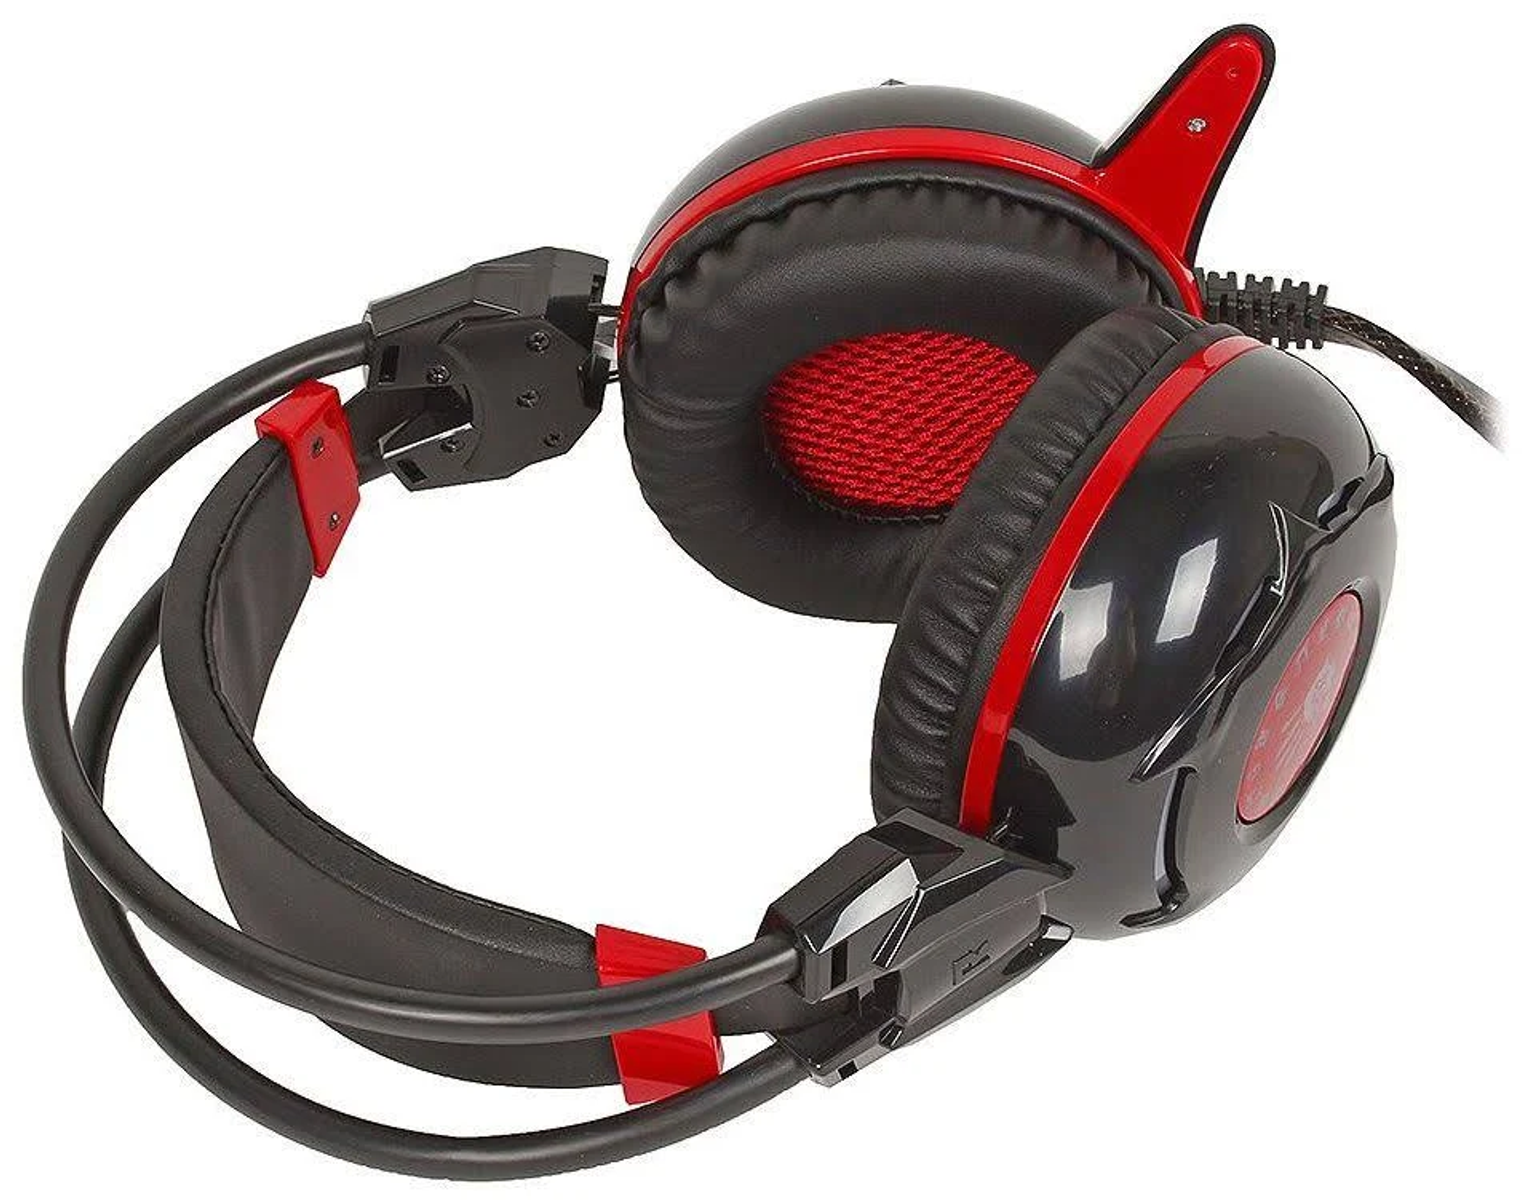 G300, Schwarz Bloody Gaming BLOODY Headset Over-ear